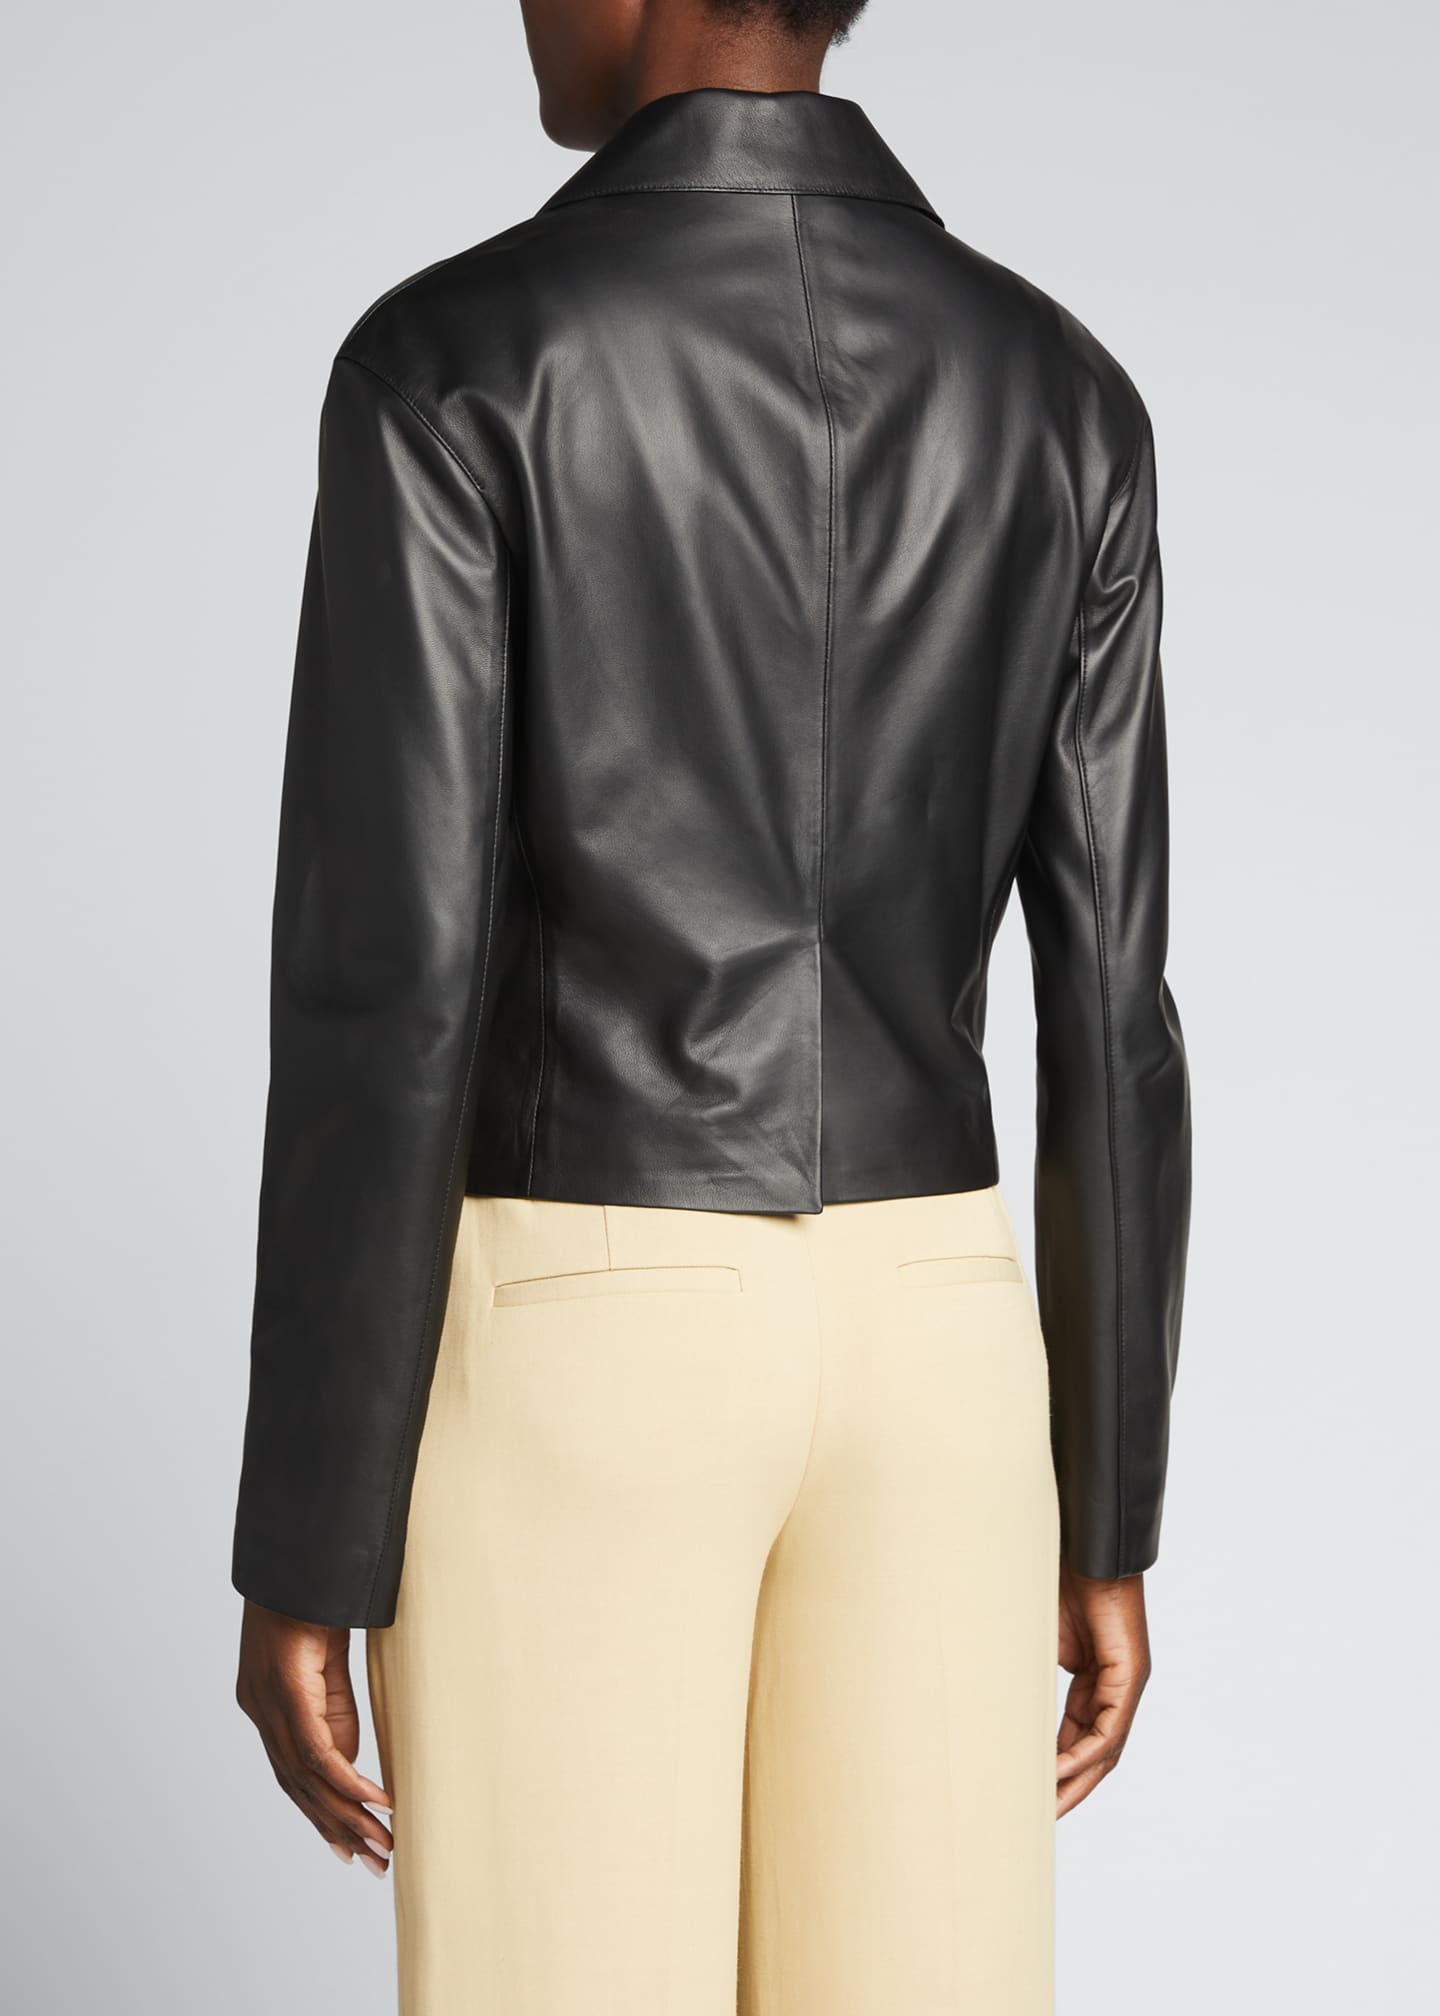 Vince Cropped Leather Jacket - Bergdorf Goodman